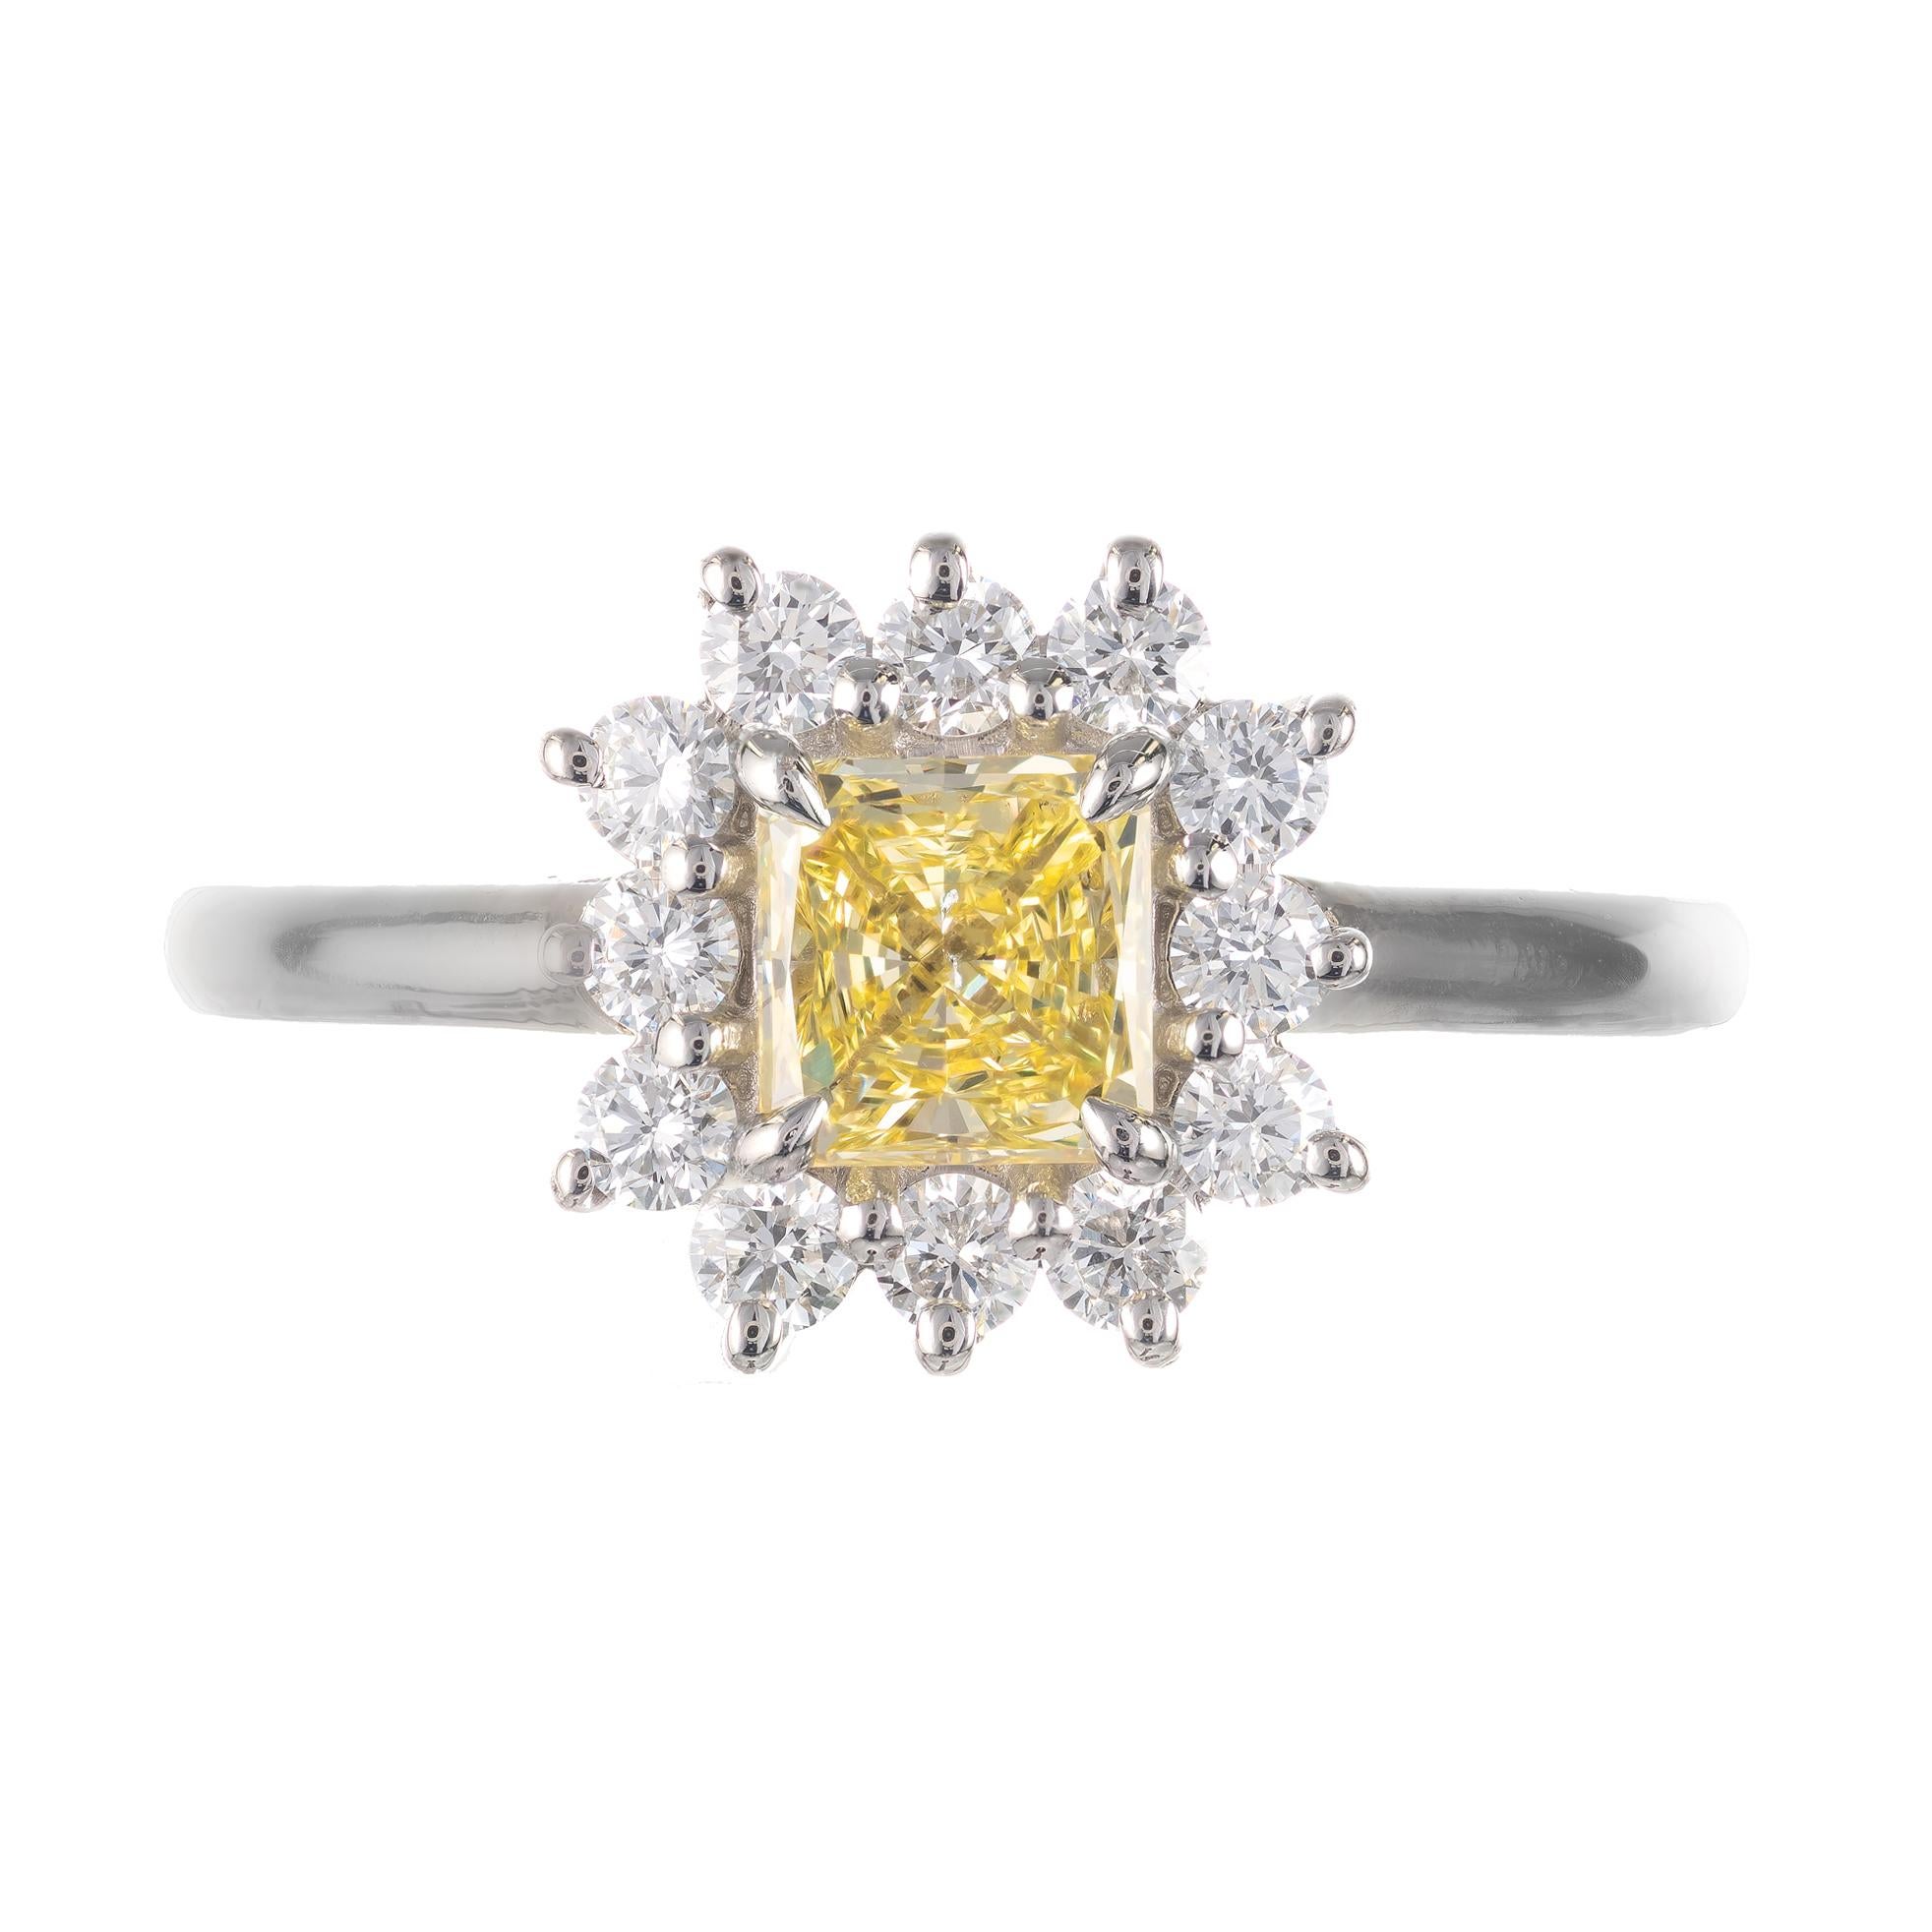 0.55 carat fancy yellow radiant cut diamond and white diamond engagement ring. Rectangular yellow diamond center stone with a halo of  12 round diamonds set in a platinum setting from the Peter Suchy Jewelers Workshop.  

1 rectangular natural fancy